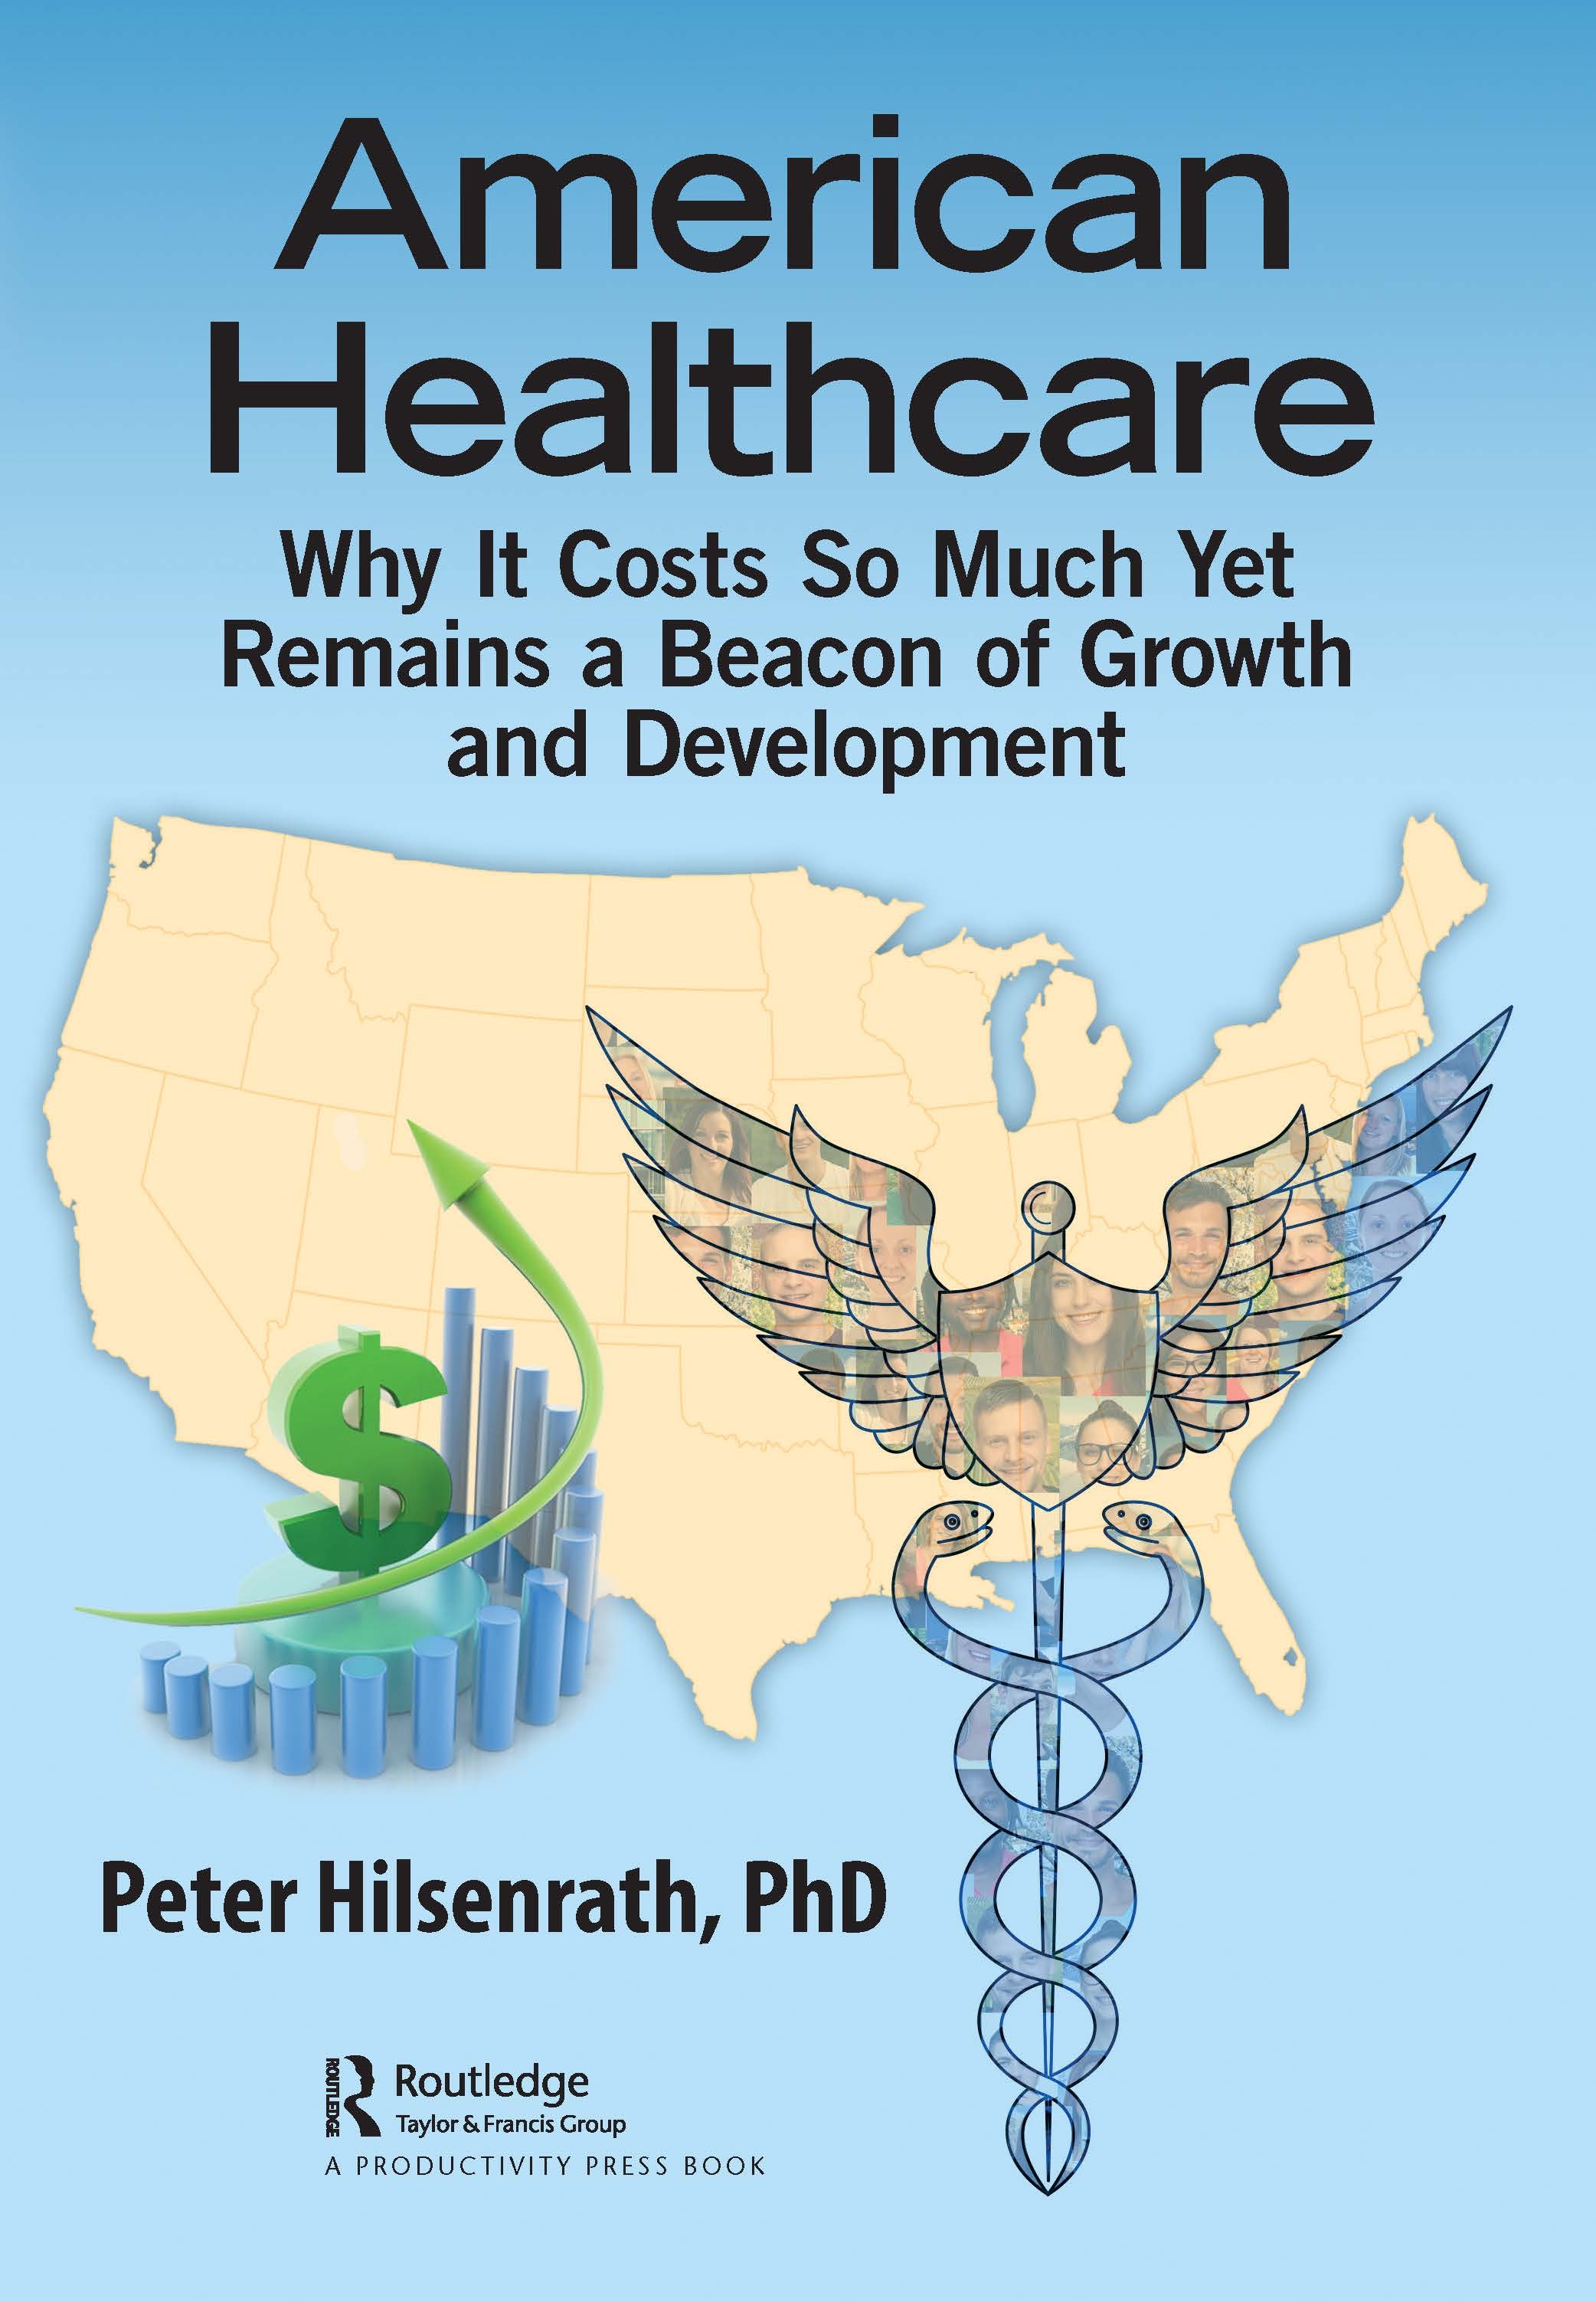 American Health Care: Why It Costs So Much Yet Remains a Beacon of Growth and Development